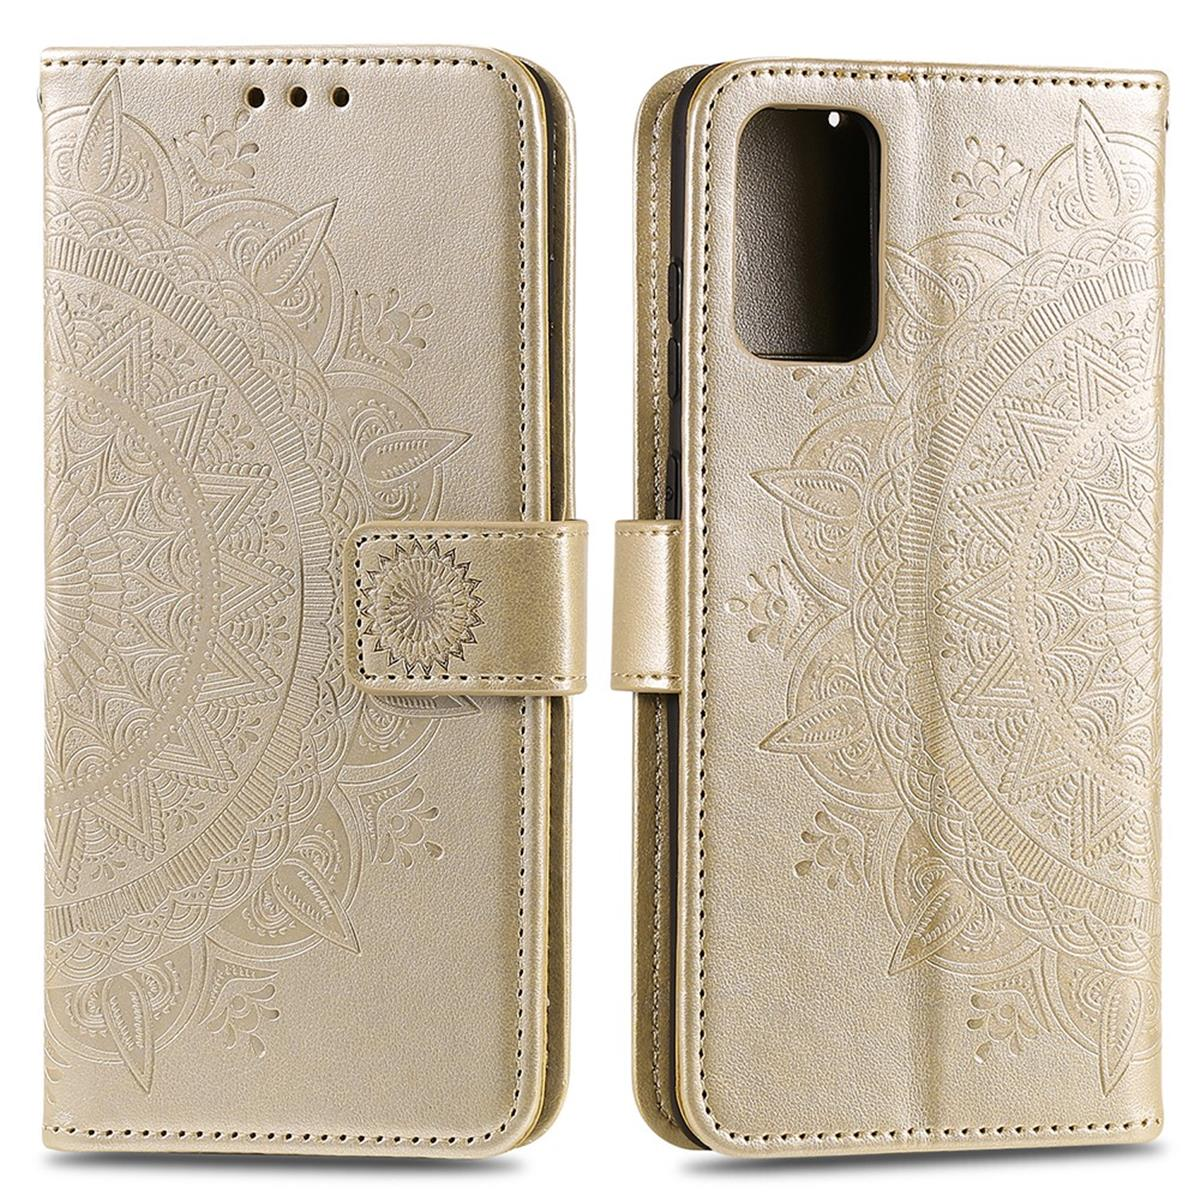 Mandala Gold Bookcover, mit Galaxy Plus, COVERKINGZ Muster, S20 Samsung, Klapphülle